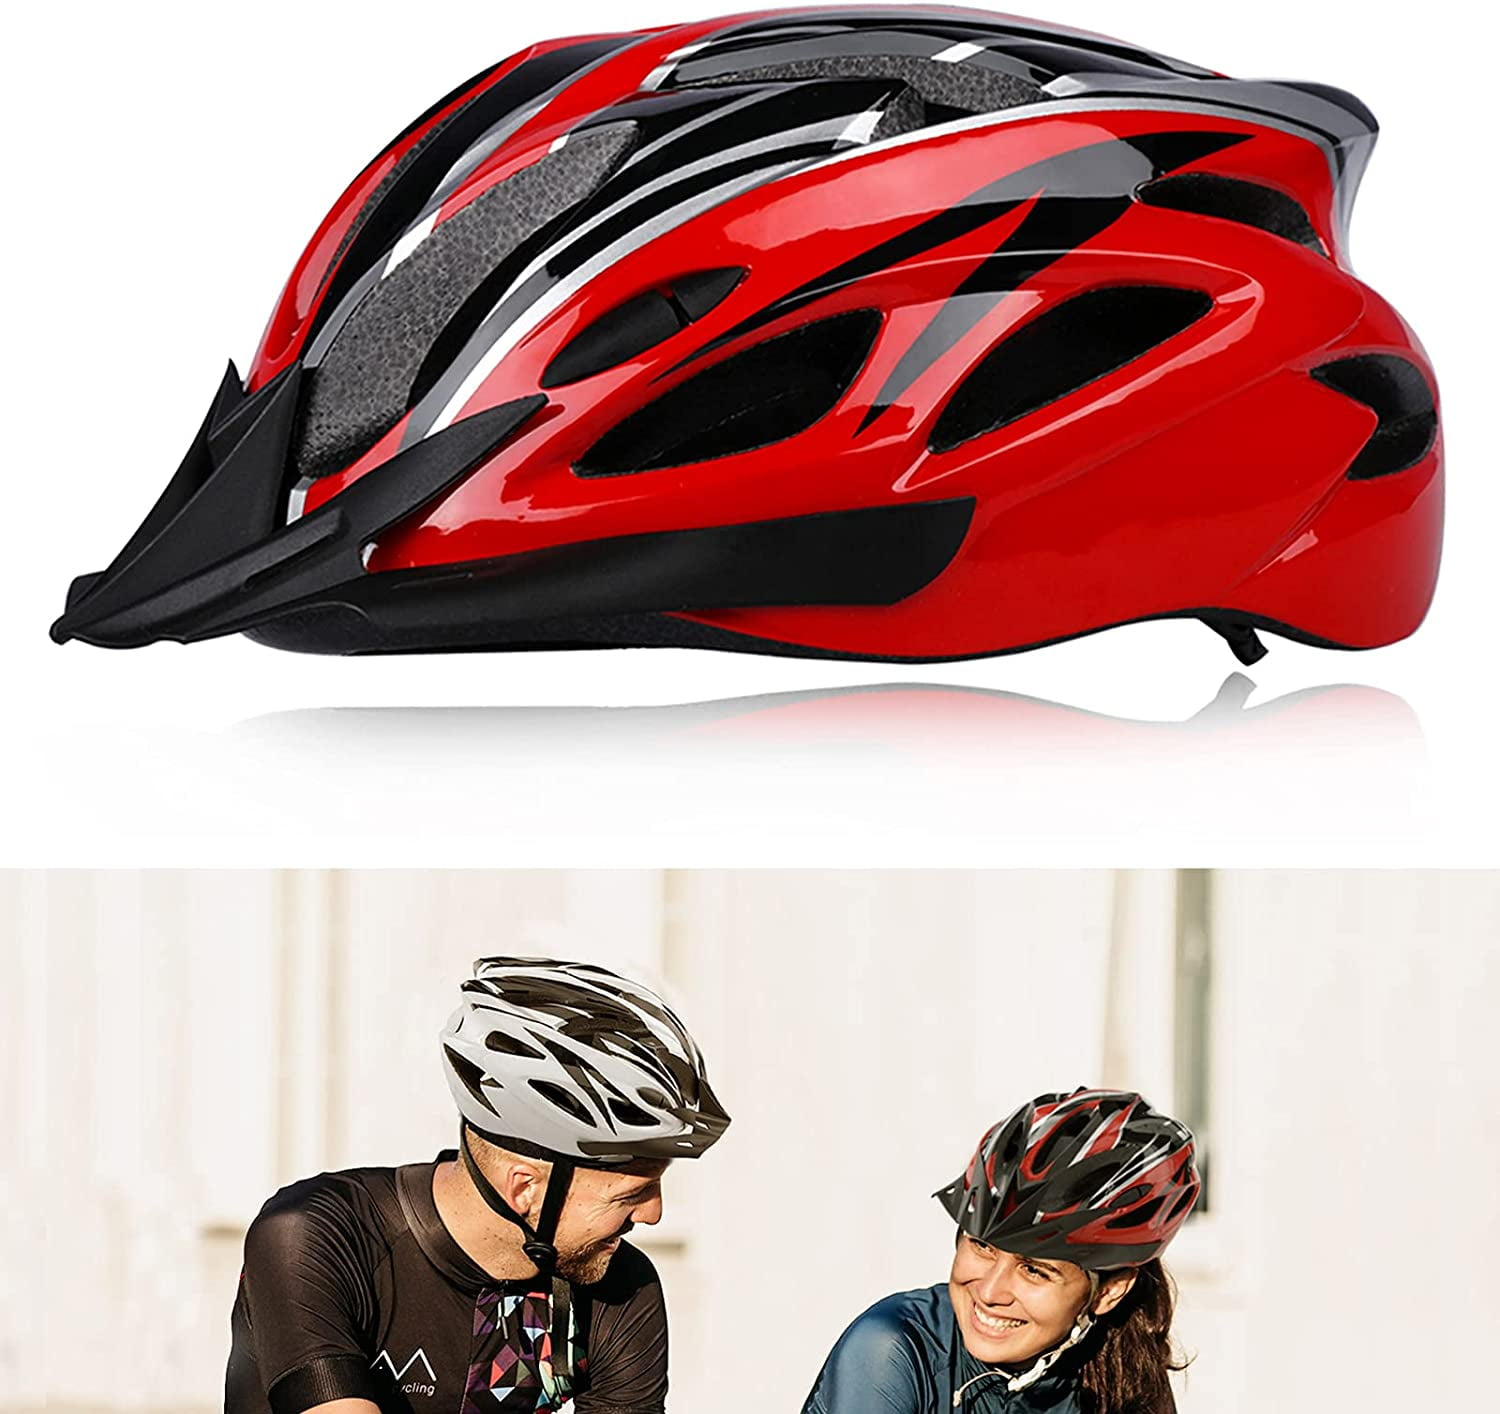 SUNRIMOON Adult Cycling Bike Helmet Bicycle Cycling Helmets Lightweight Road Bike Helmet Microshell Design Adjustable Size with Detachable Visor LED Safety Light for Women and Men 21.26-24.41 Inches 